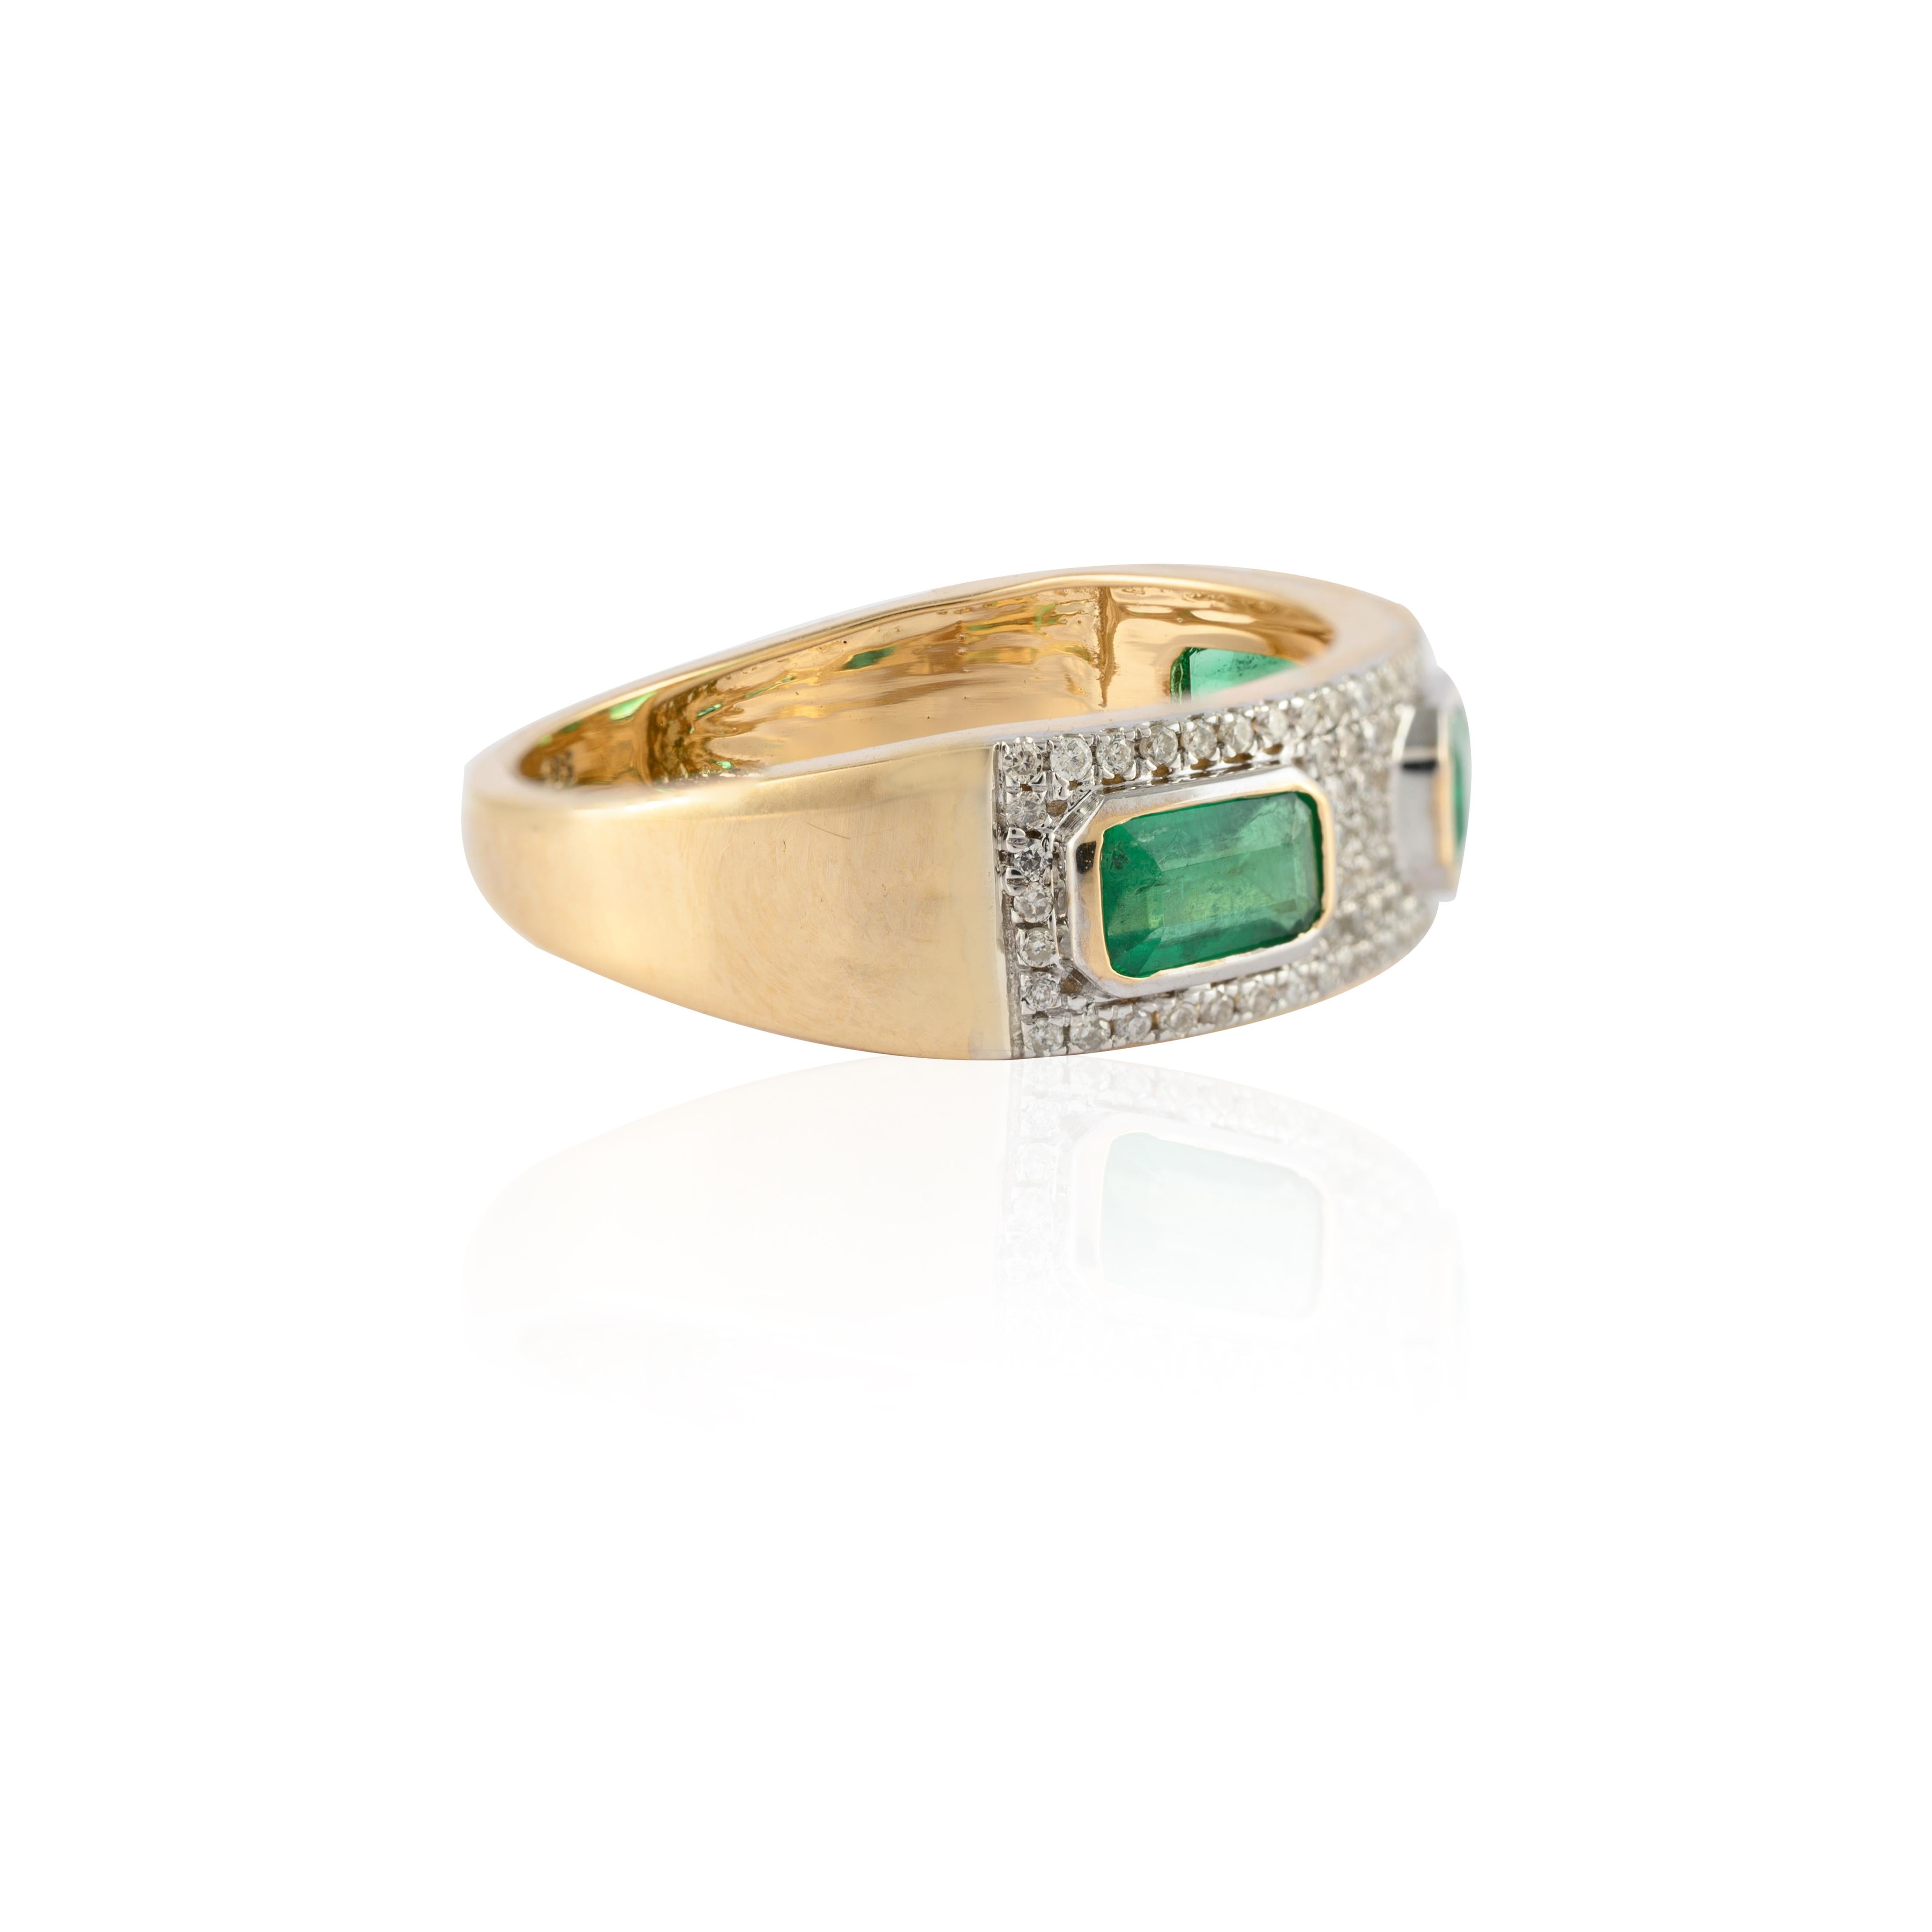 For Sale:  Impeccable 14k Yellow Gold Three Stone Emerald and Diamond Engagement Ring 3